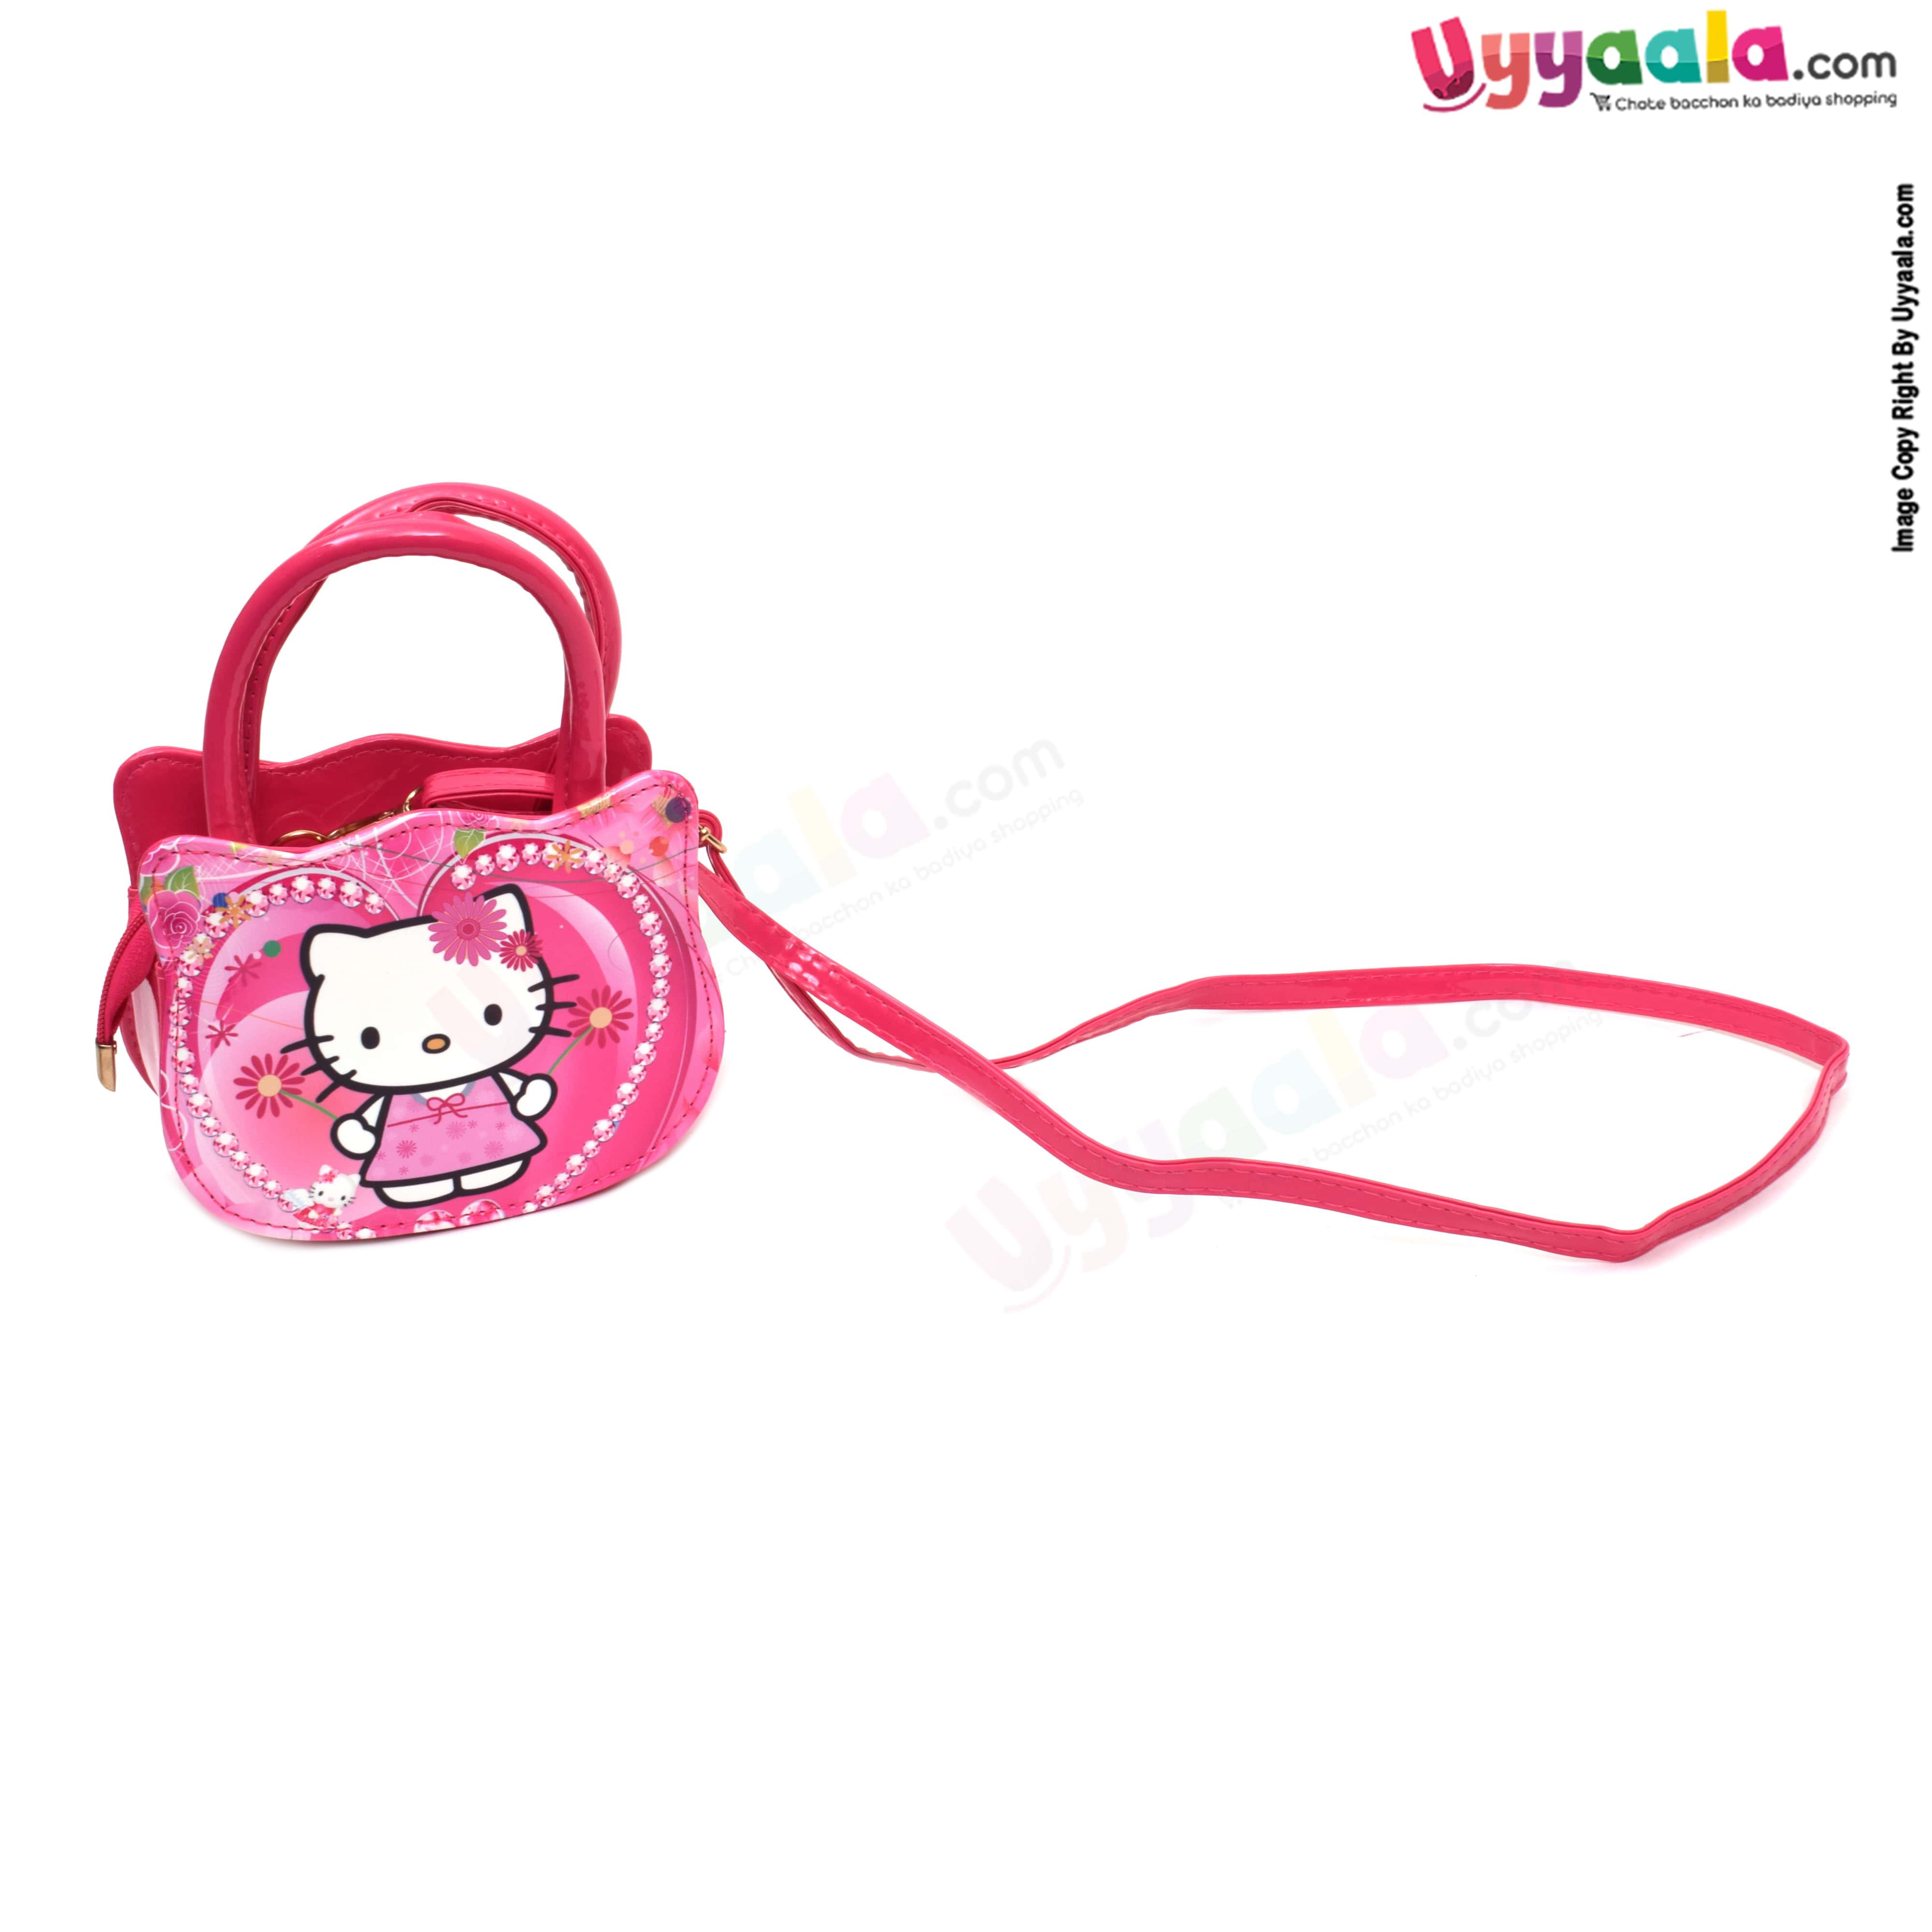 kids hand bag for baby girl with adjustable strap & hello kitty print, age 3+ years